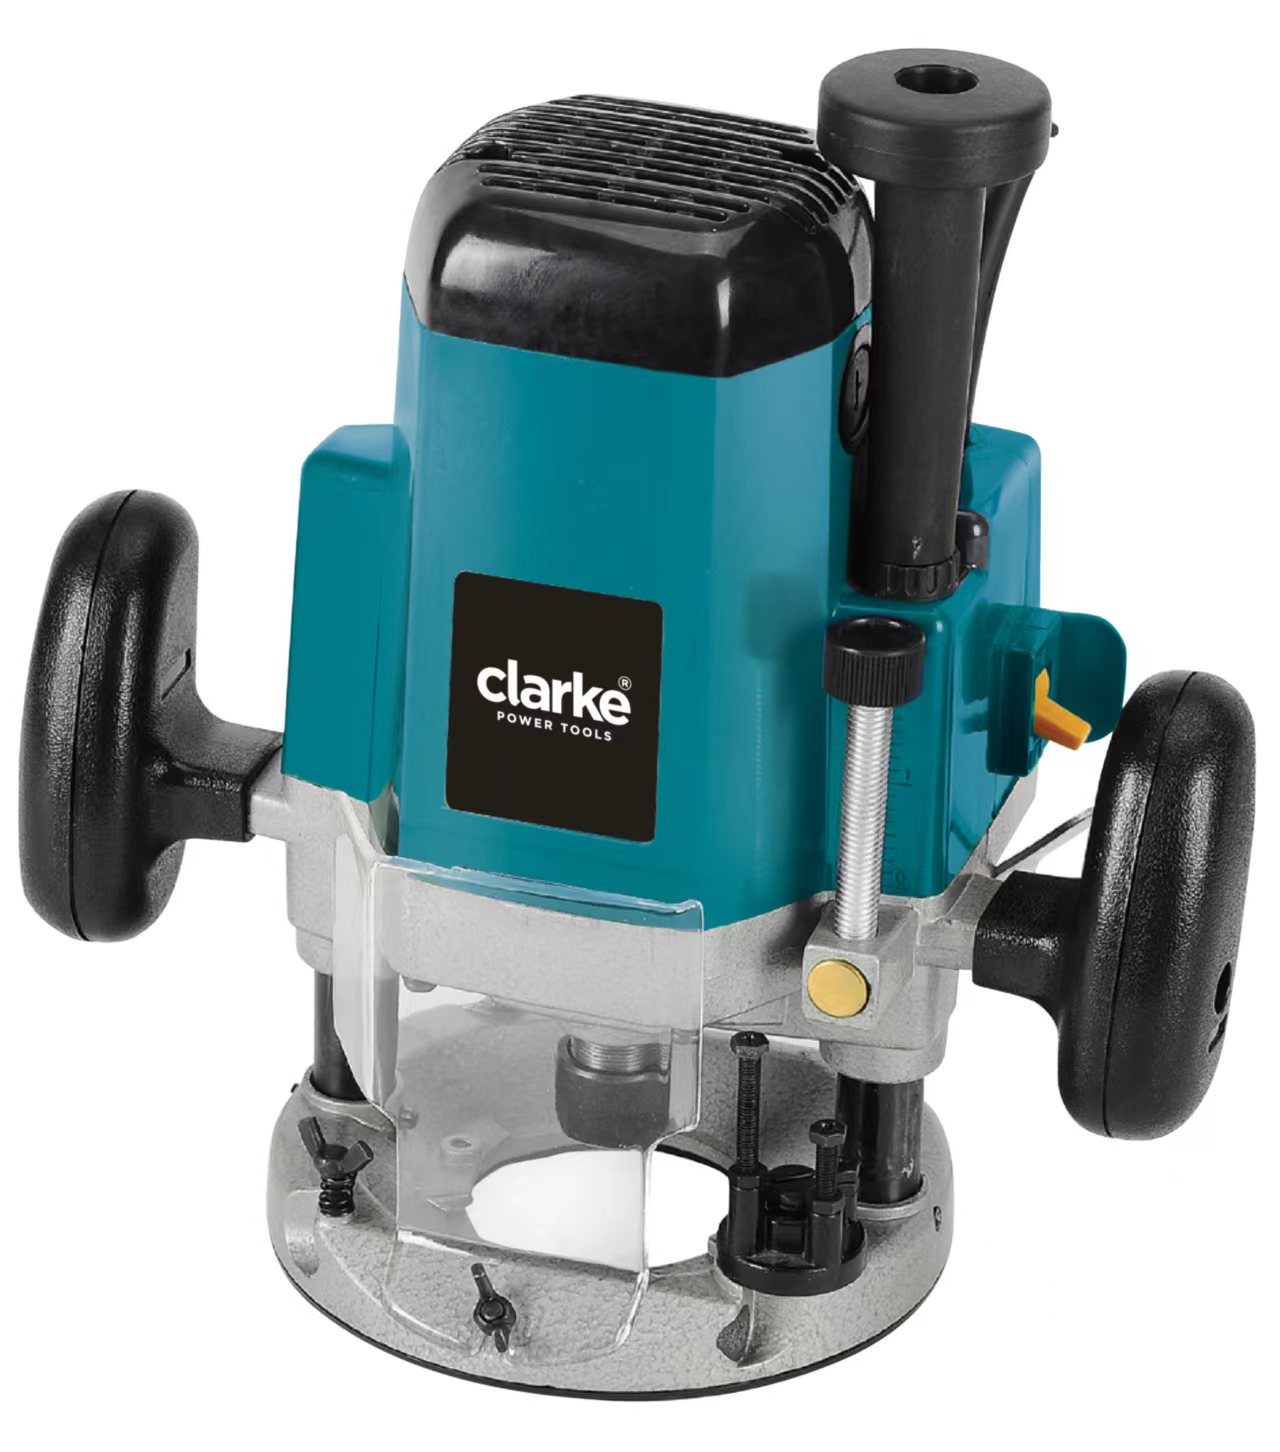 CLARKE-12MM ELECTRIC WOOD ROUTER